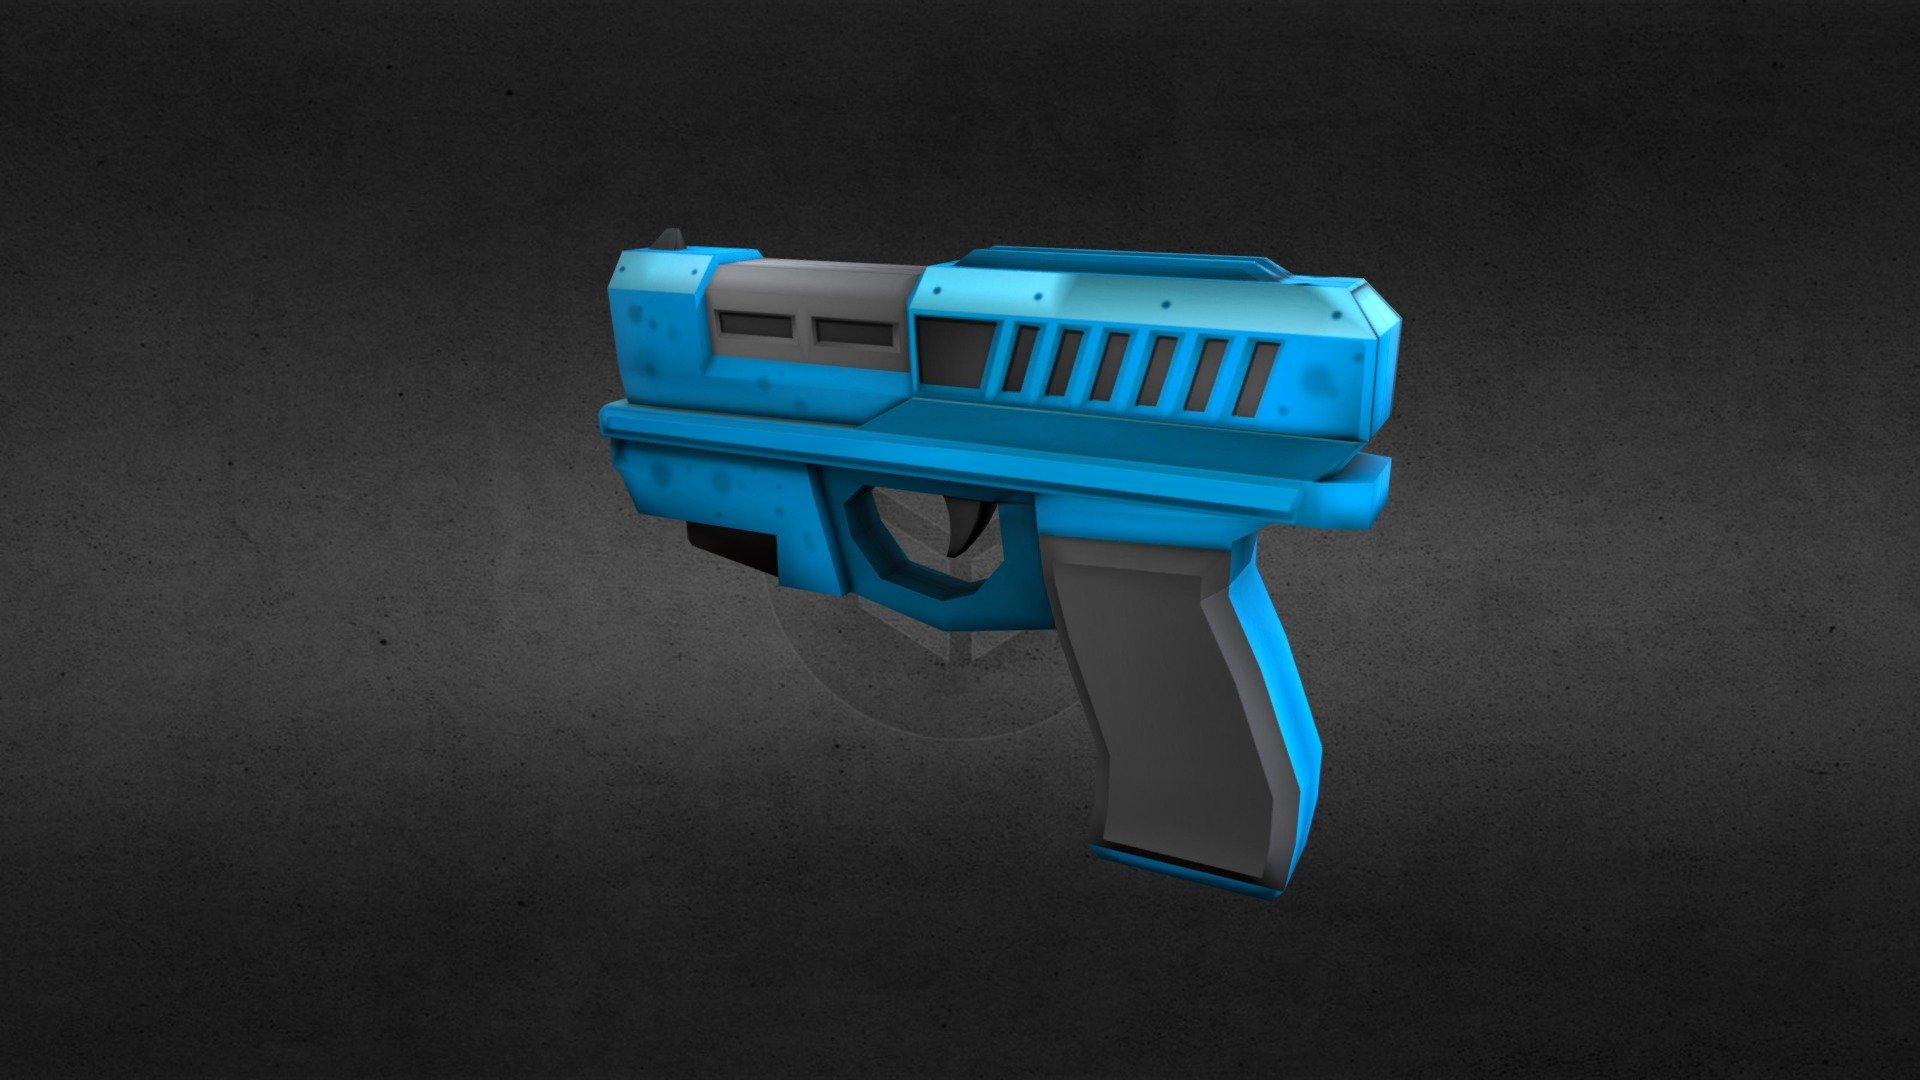 Lock and load! Prepare for some intense first person action!

Includes 5 different skins, normal map, and ambient occlusion - Low Poly Game Ready SciFi Pistol - Buy Royalty Free 3D model by Anthony Pilcher (@AnthonyPilcher) 3d model